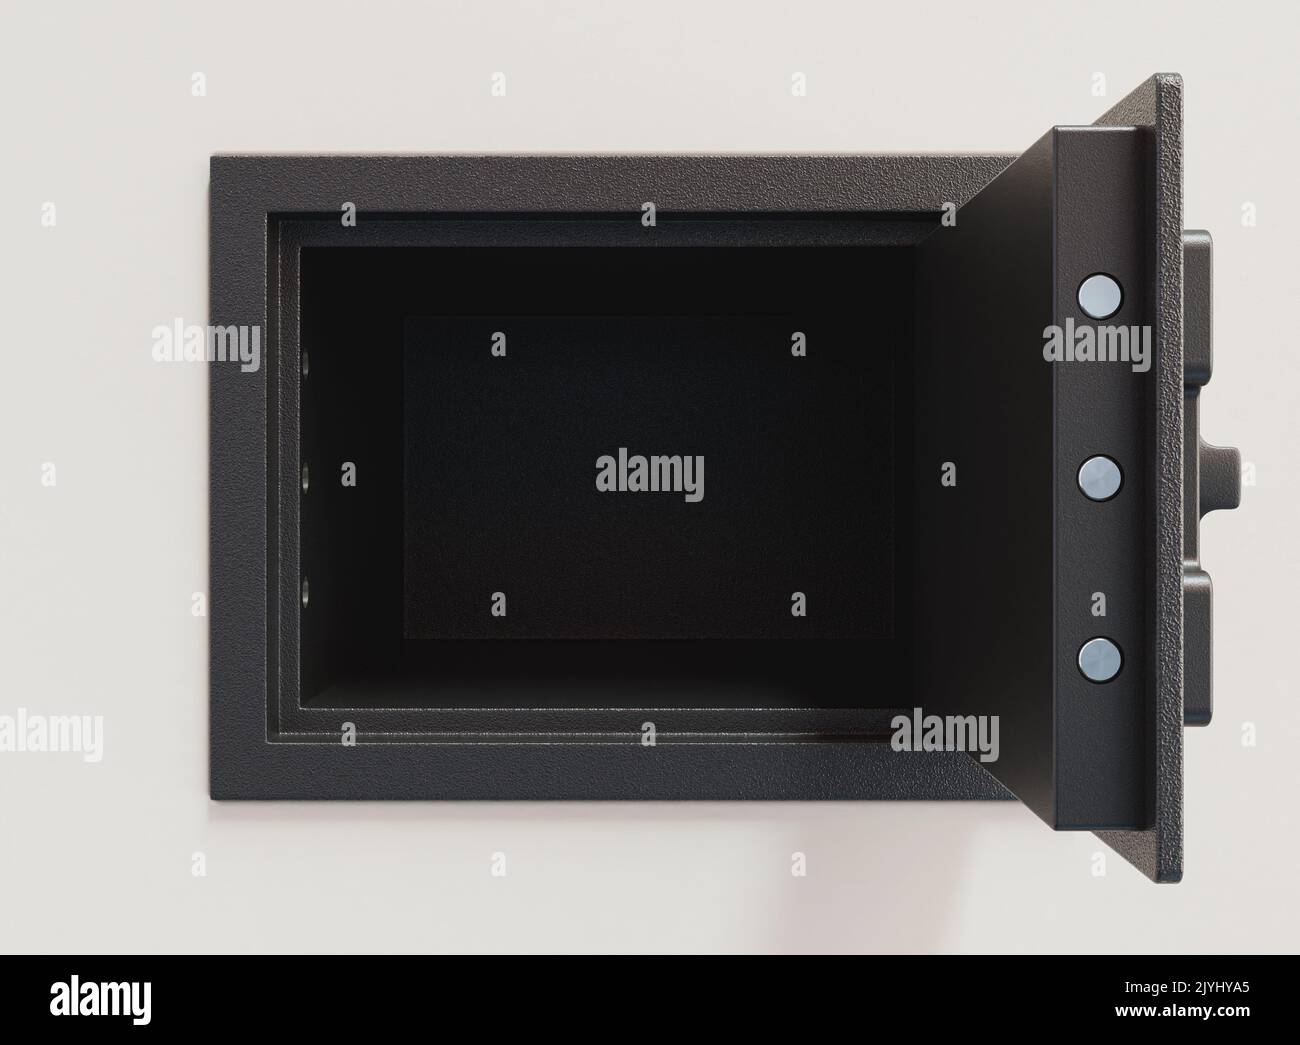 An opened digital wall safe set into a white wall background - 3D render Stock Photo